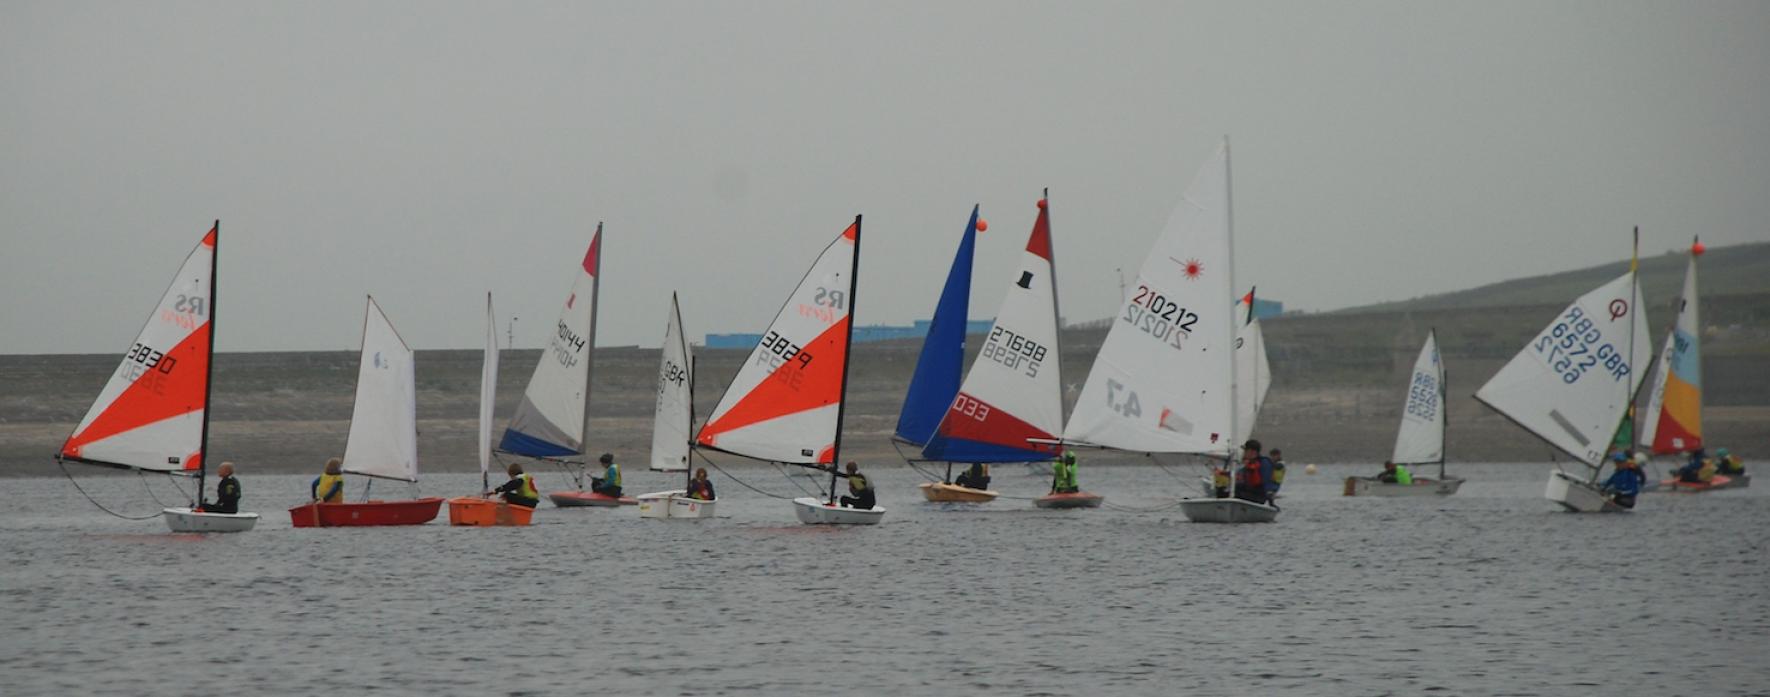 THEY’RE OFF: Teesdale Sailing and Watersports Club welcomed 24 competitors for the North East and Yorkshire Youth Travellers Series event at Grassholme